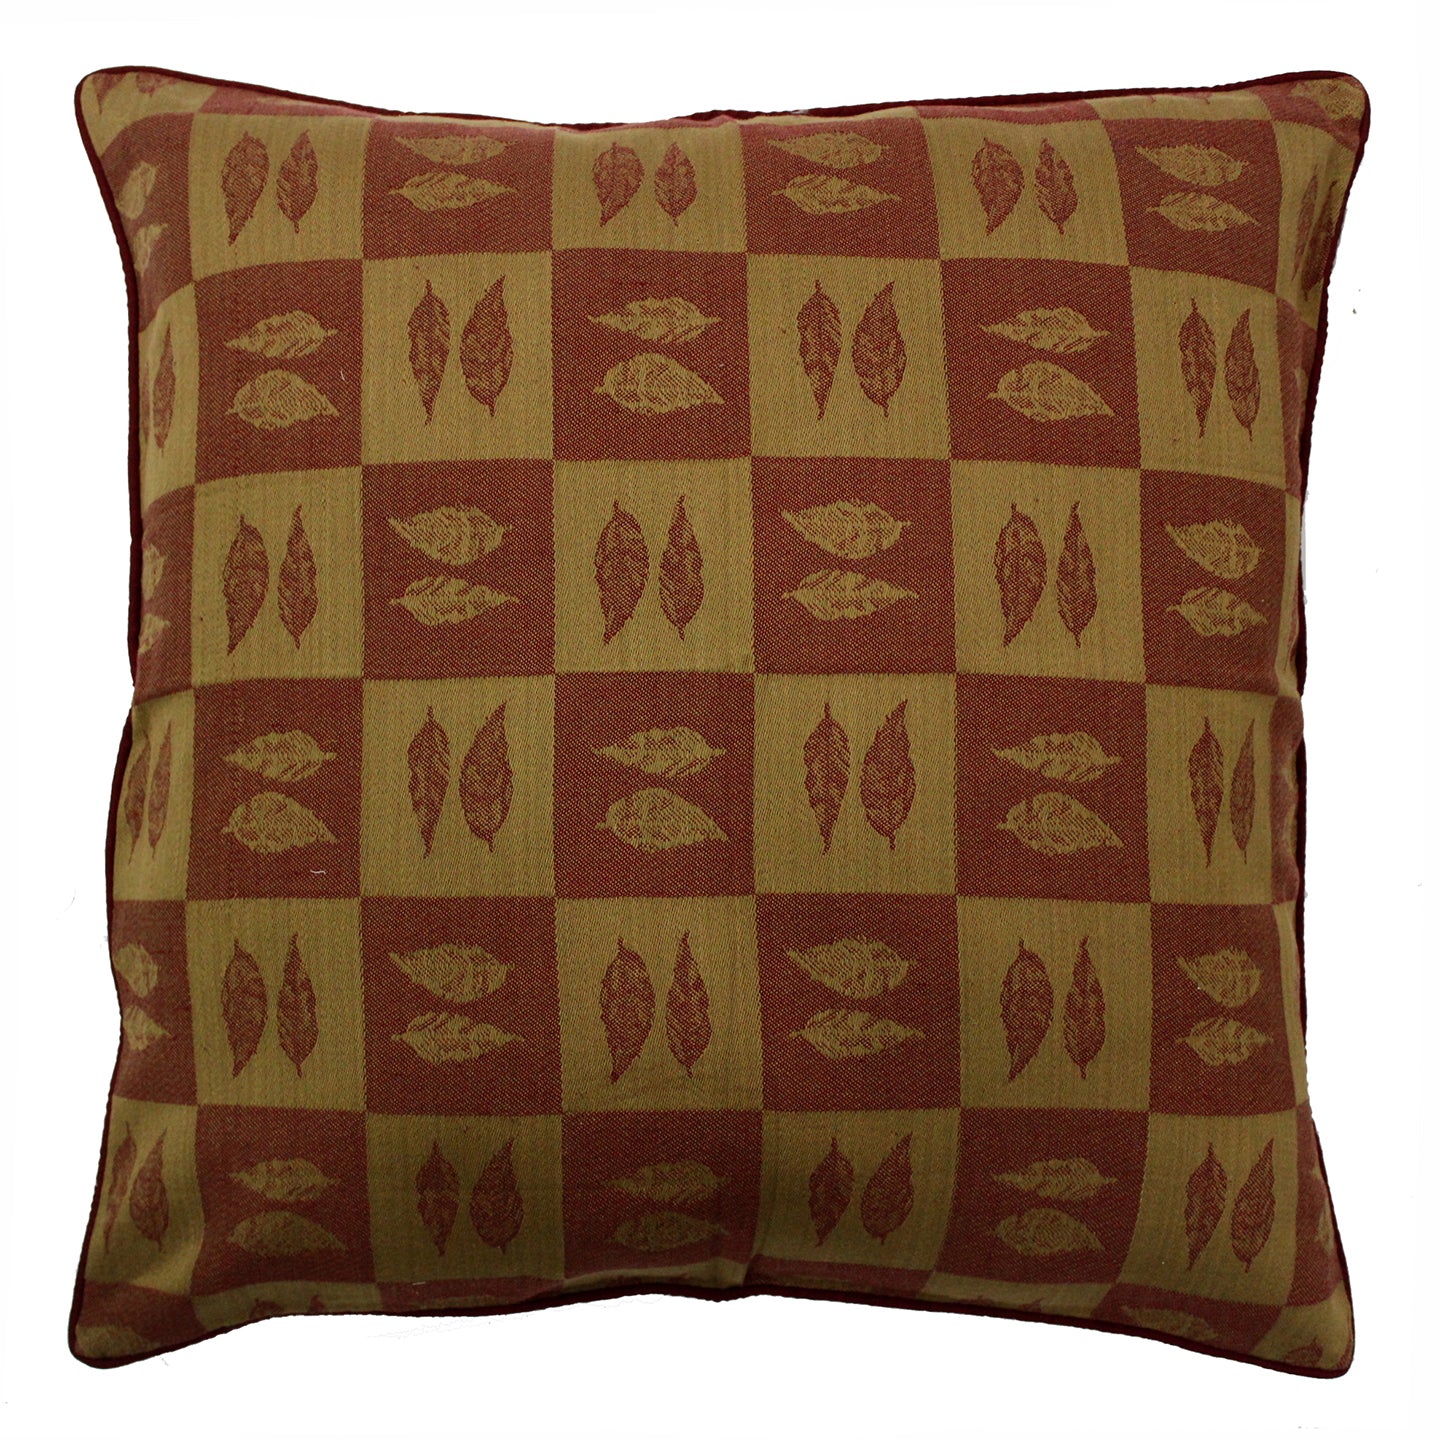 Soft Woven floral Cotton Cushion Cover Set in Maroon online (2Pcs)